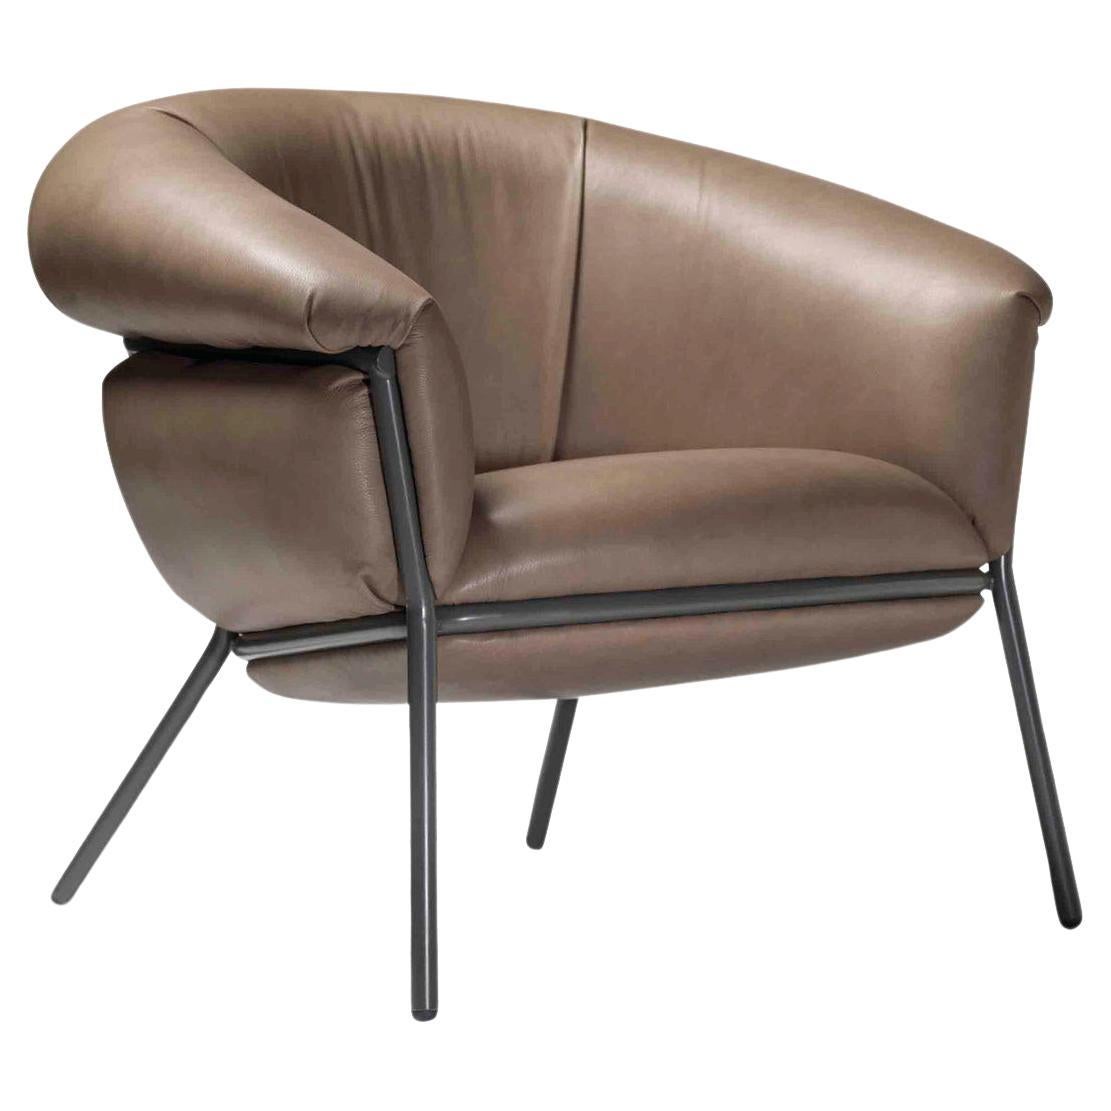 Contemporary Armchair 'Grasso' by Stephen Burks, Brown Clay Leather, Grey Frame